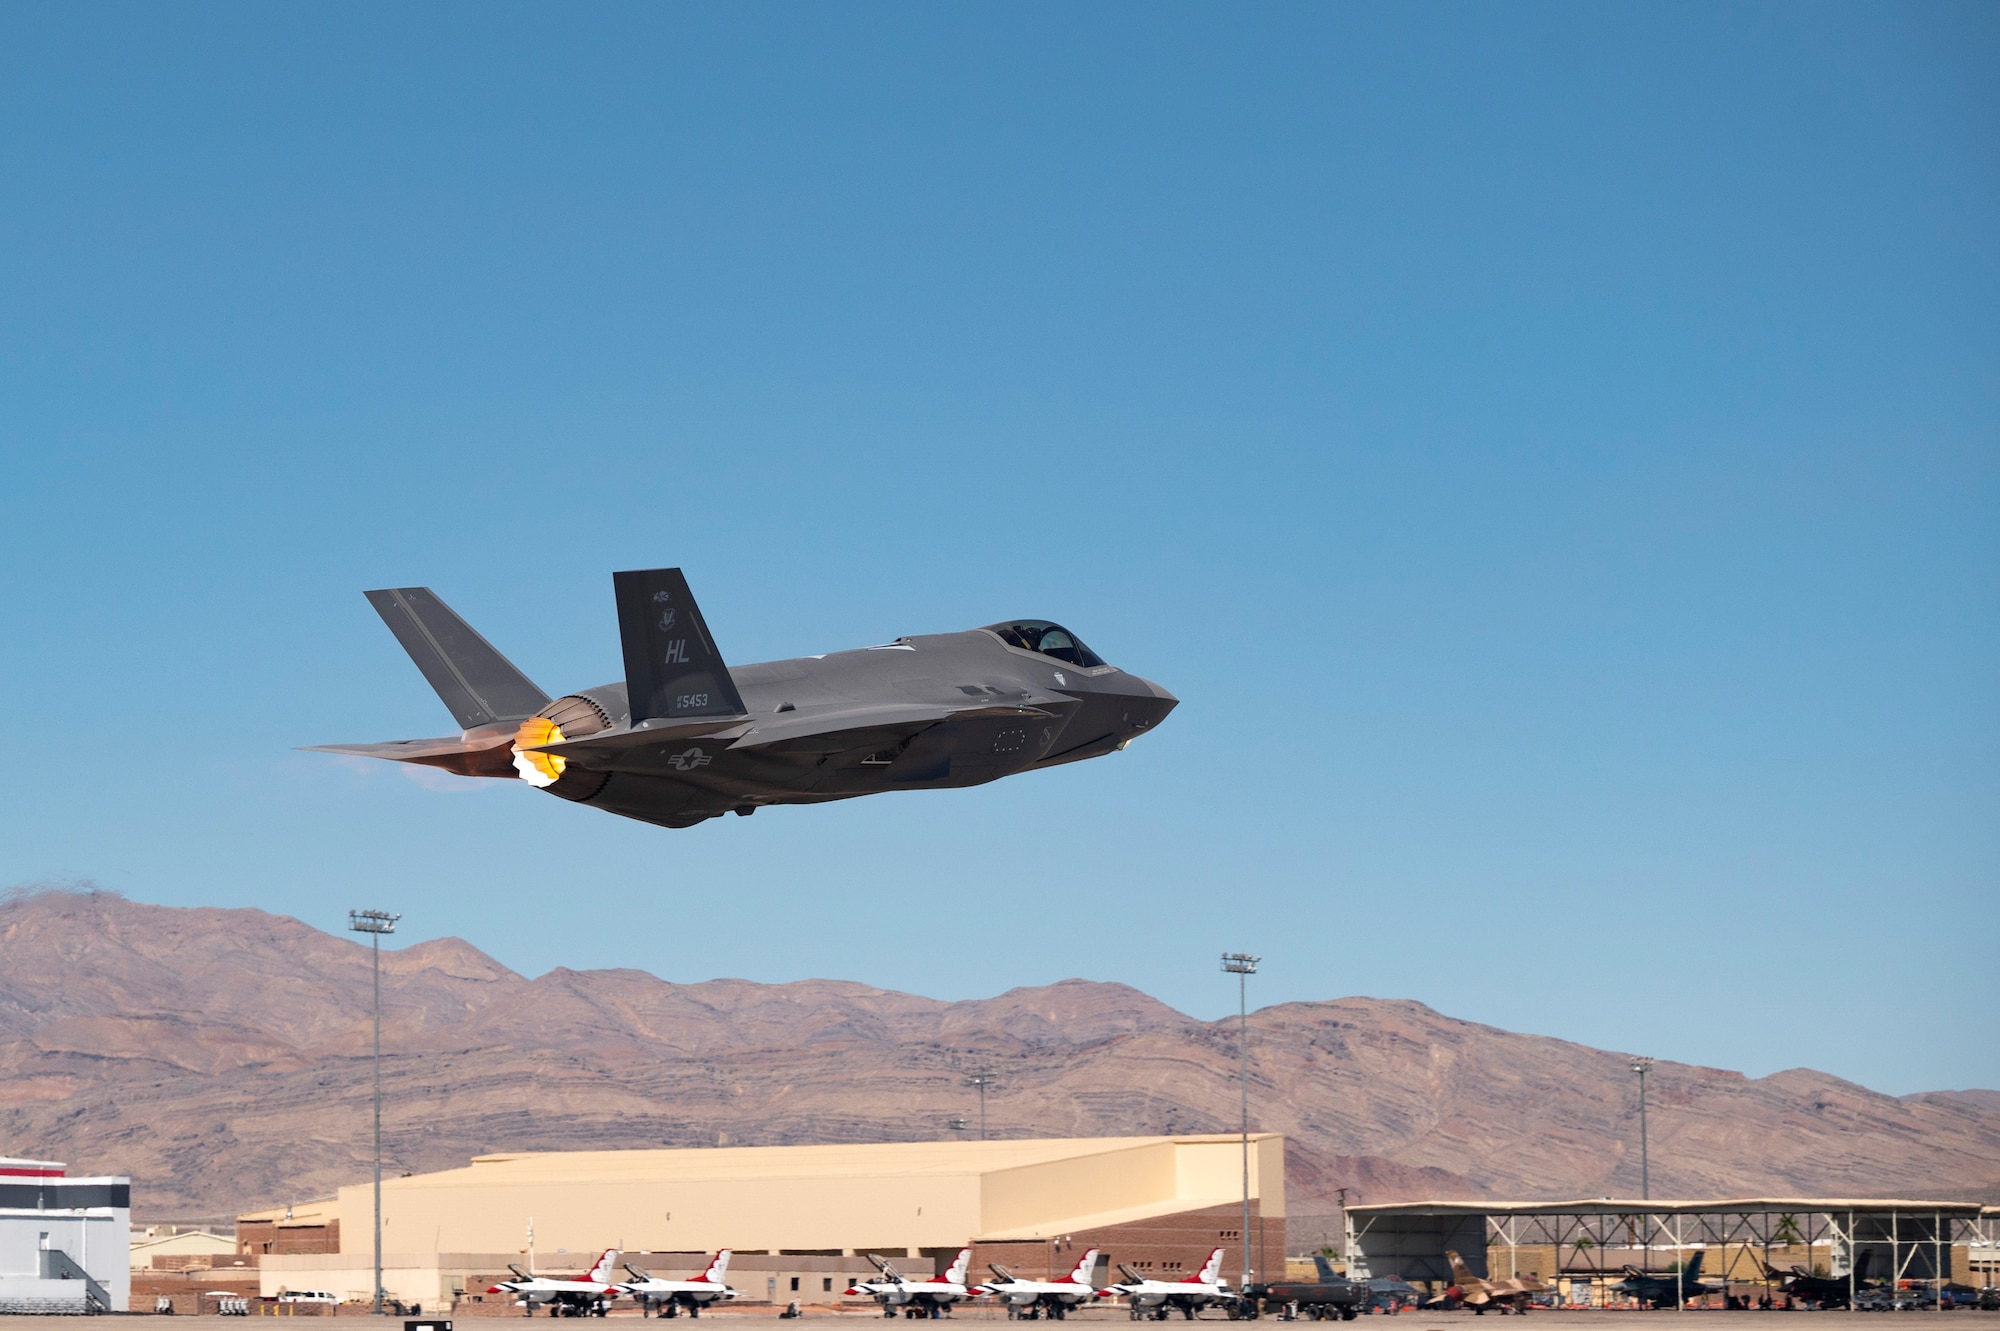 An F-35A Lightning II takes off to complete the final test exercise of the nuclear design certification process at Nellis Air Force Base, Nevada, Sept. 21, 2021 . Test pilots flew to the Tonopah Test Range at Nellis AFB and released two B61-12 Joint Test Assemblies from operationally realistic flight envelopes. (U.S. Air Force photo by Airman 1st Class Zachary Rufus)